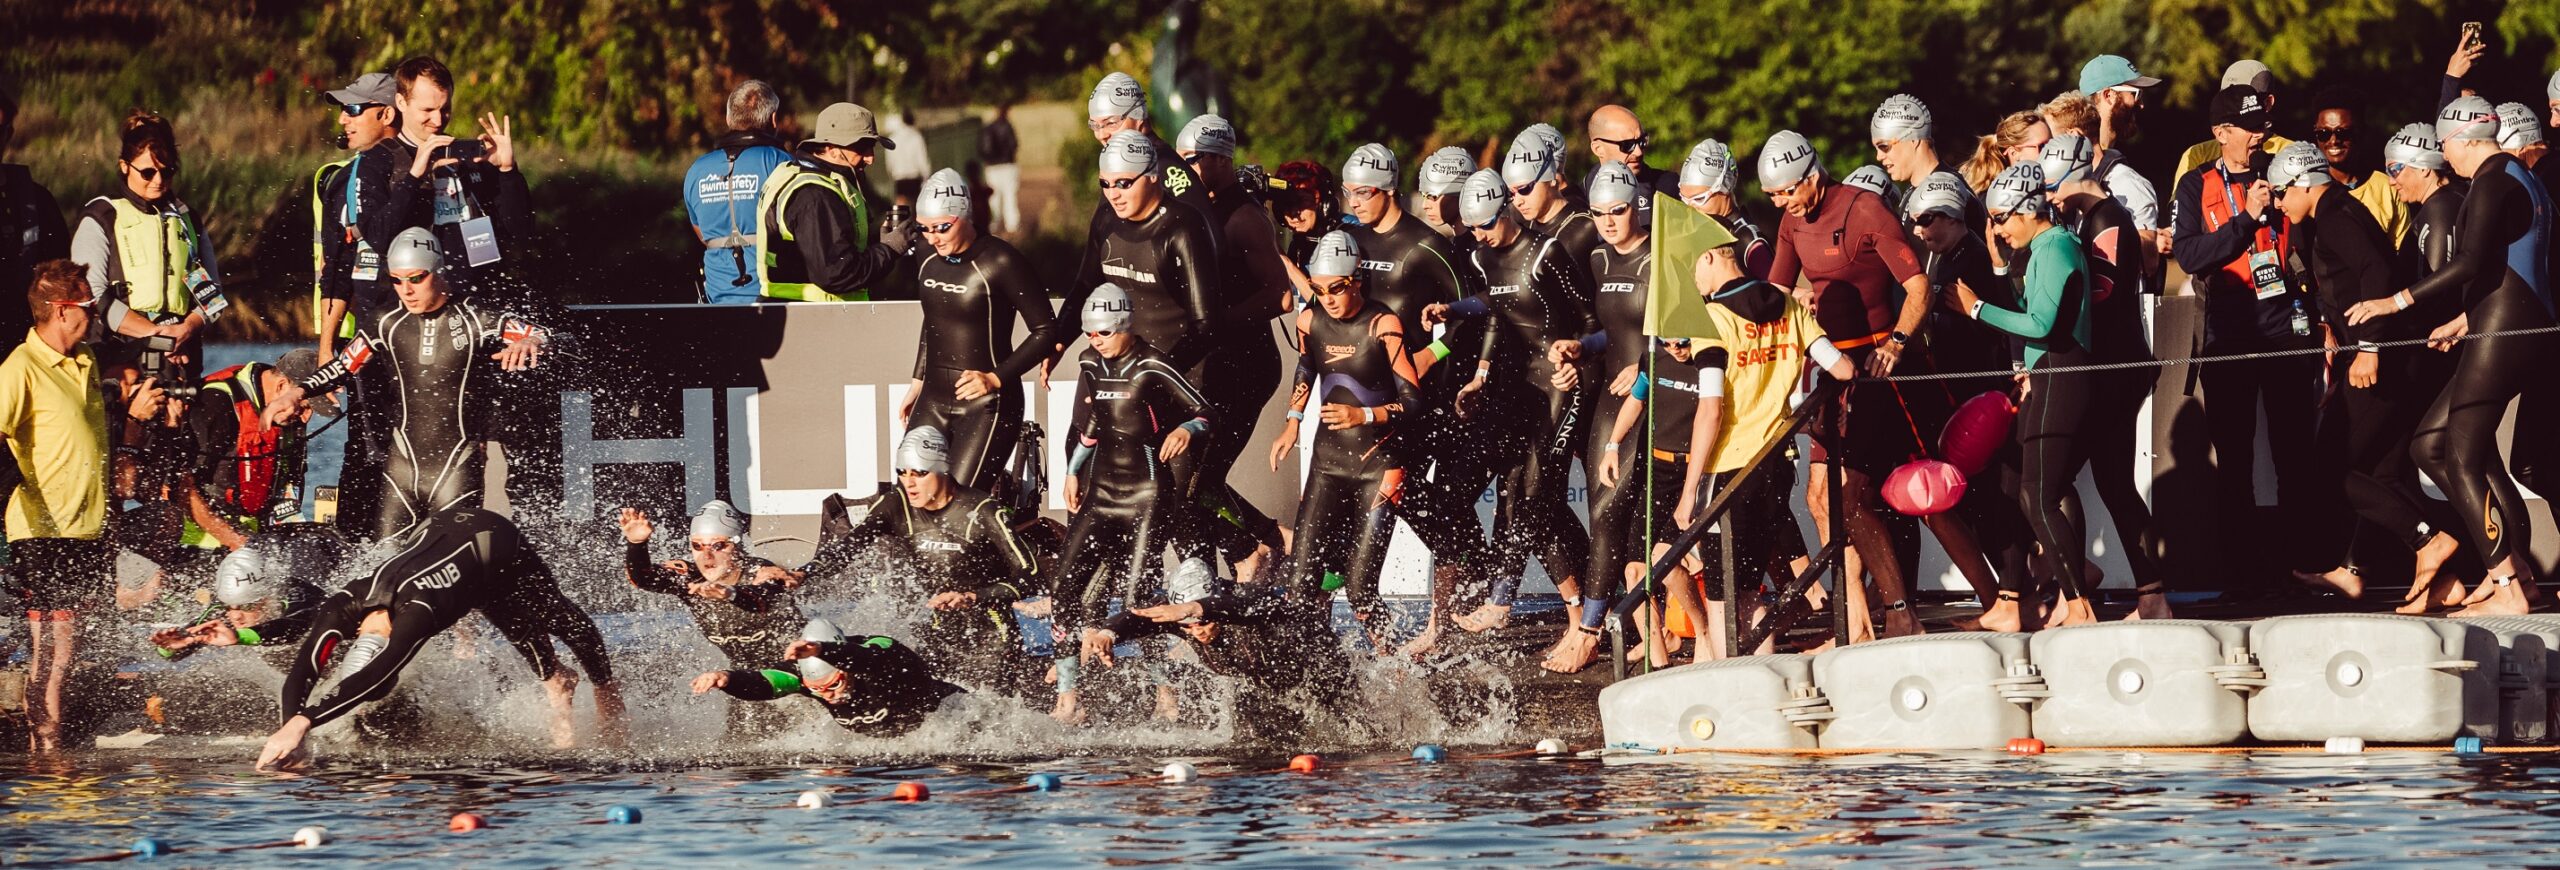 Swimmer jumping into the water at the start of the Swim Serpentine race